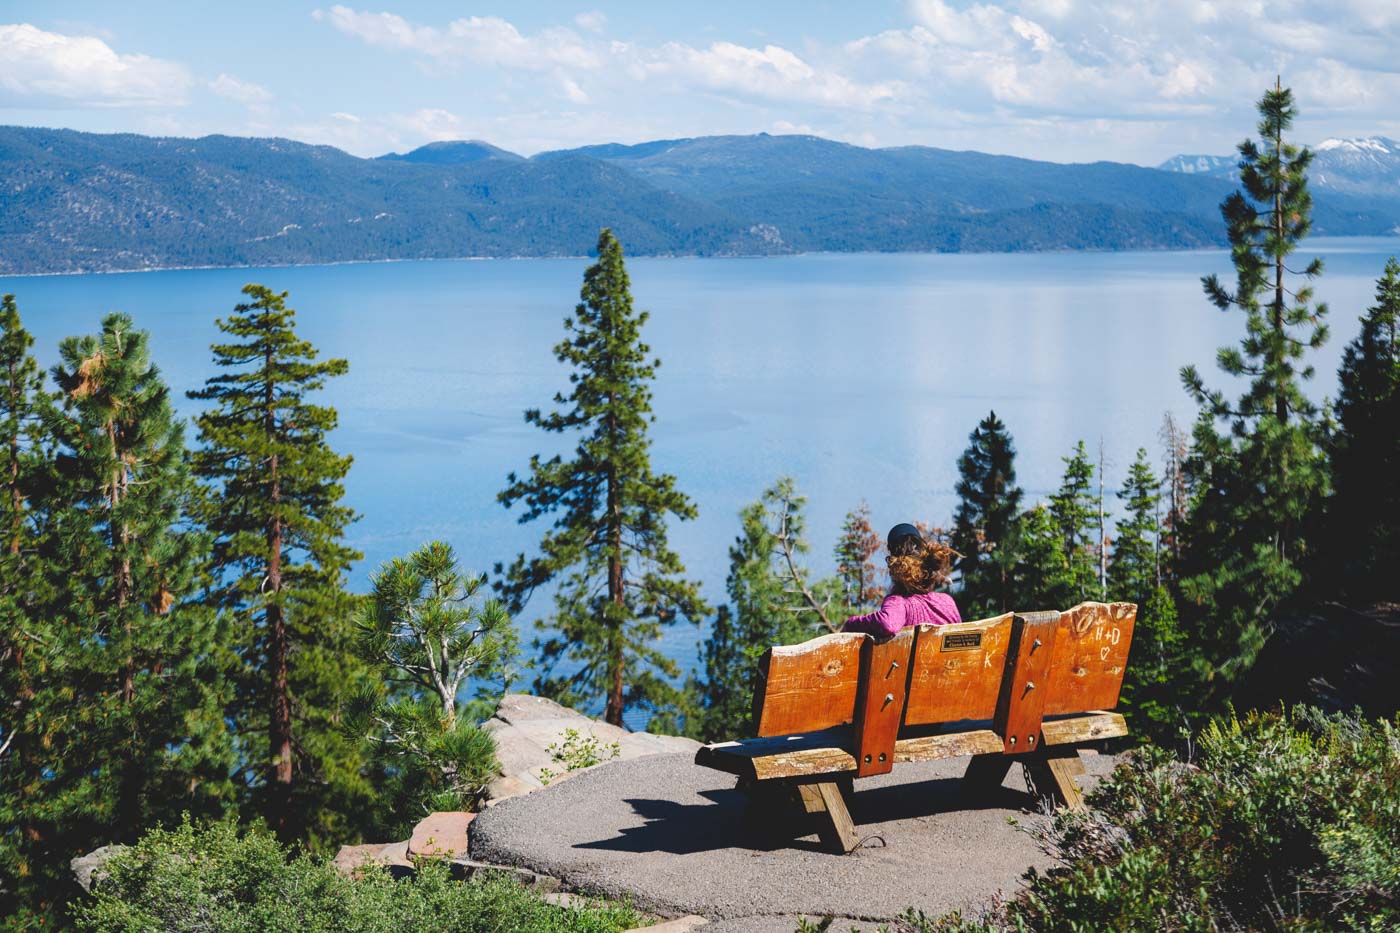 Nina sitting on a wooden bench looking out over Lake Tahoe an it's forests on a sunny day.